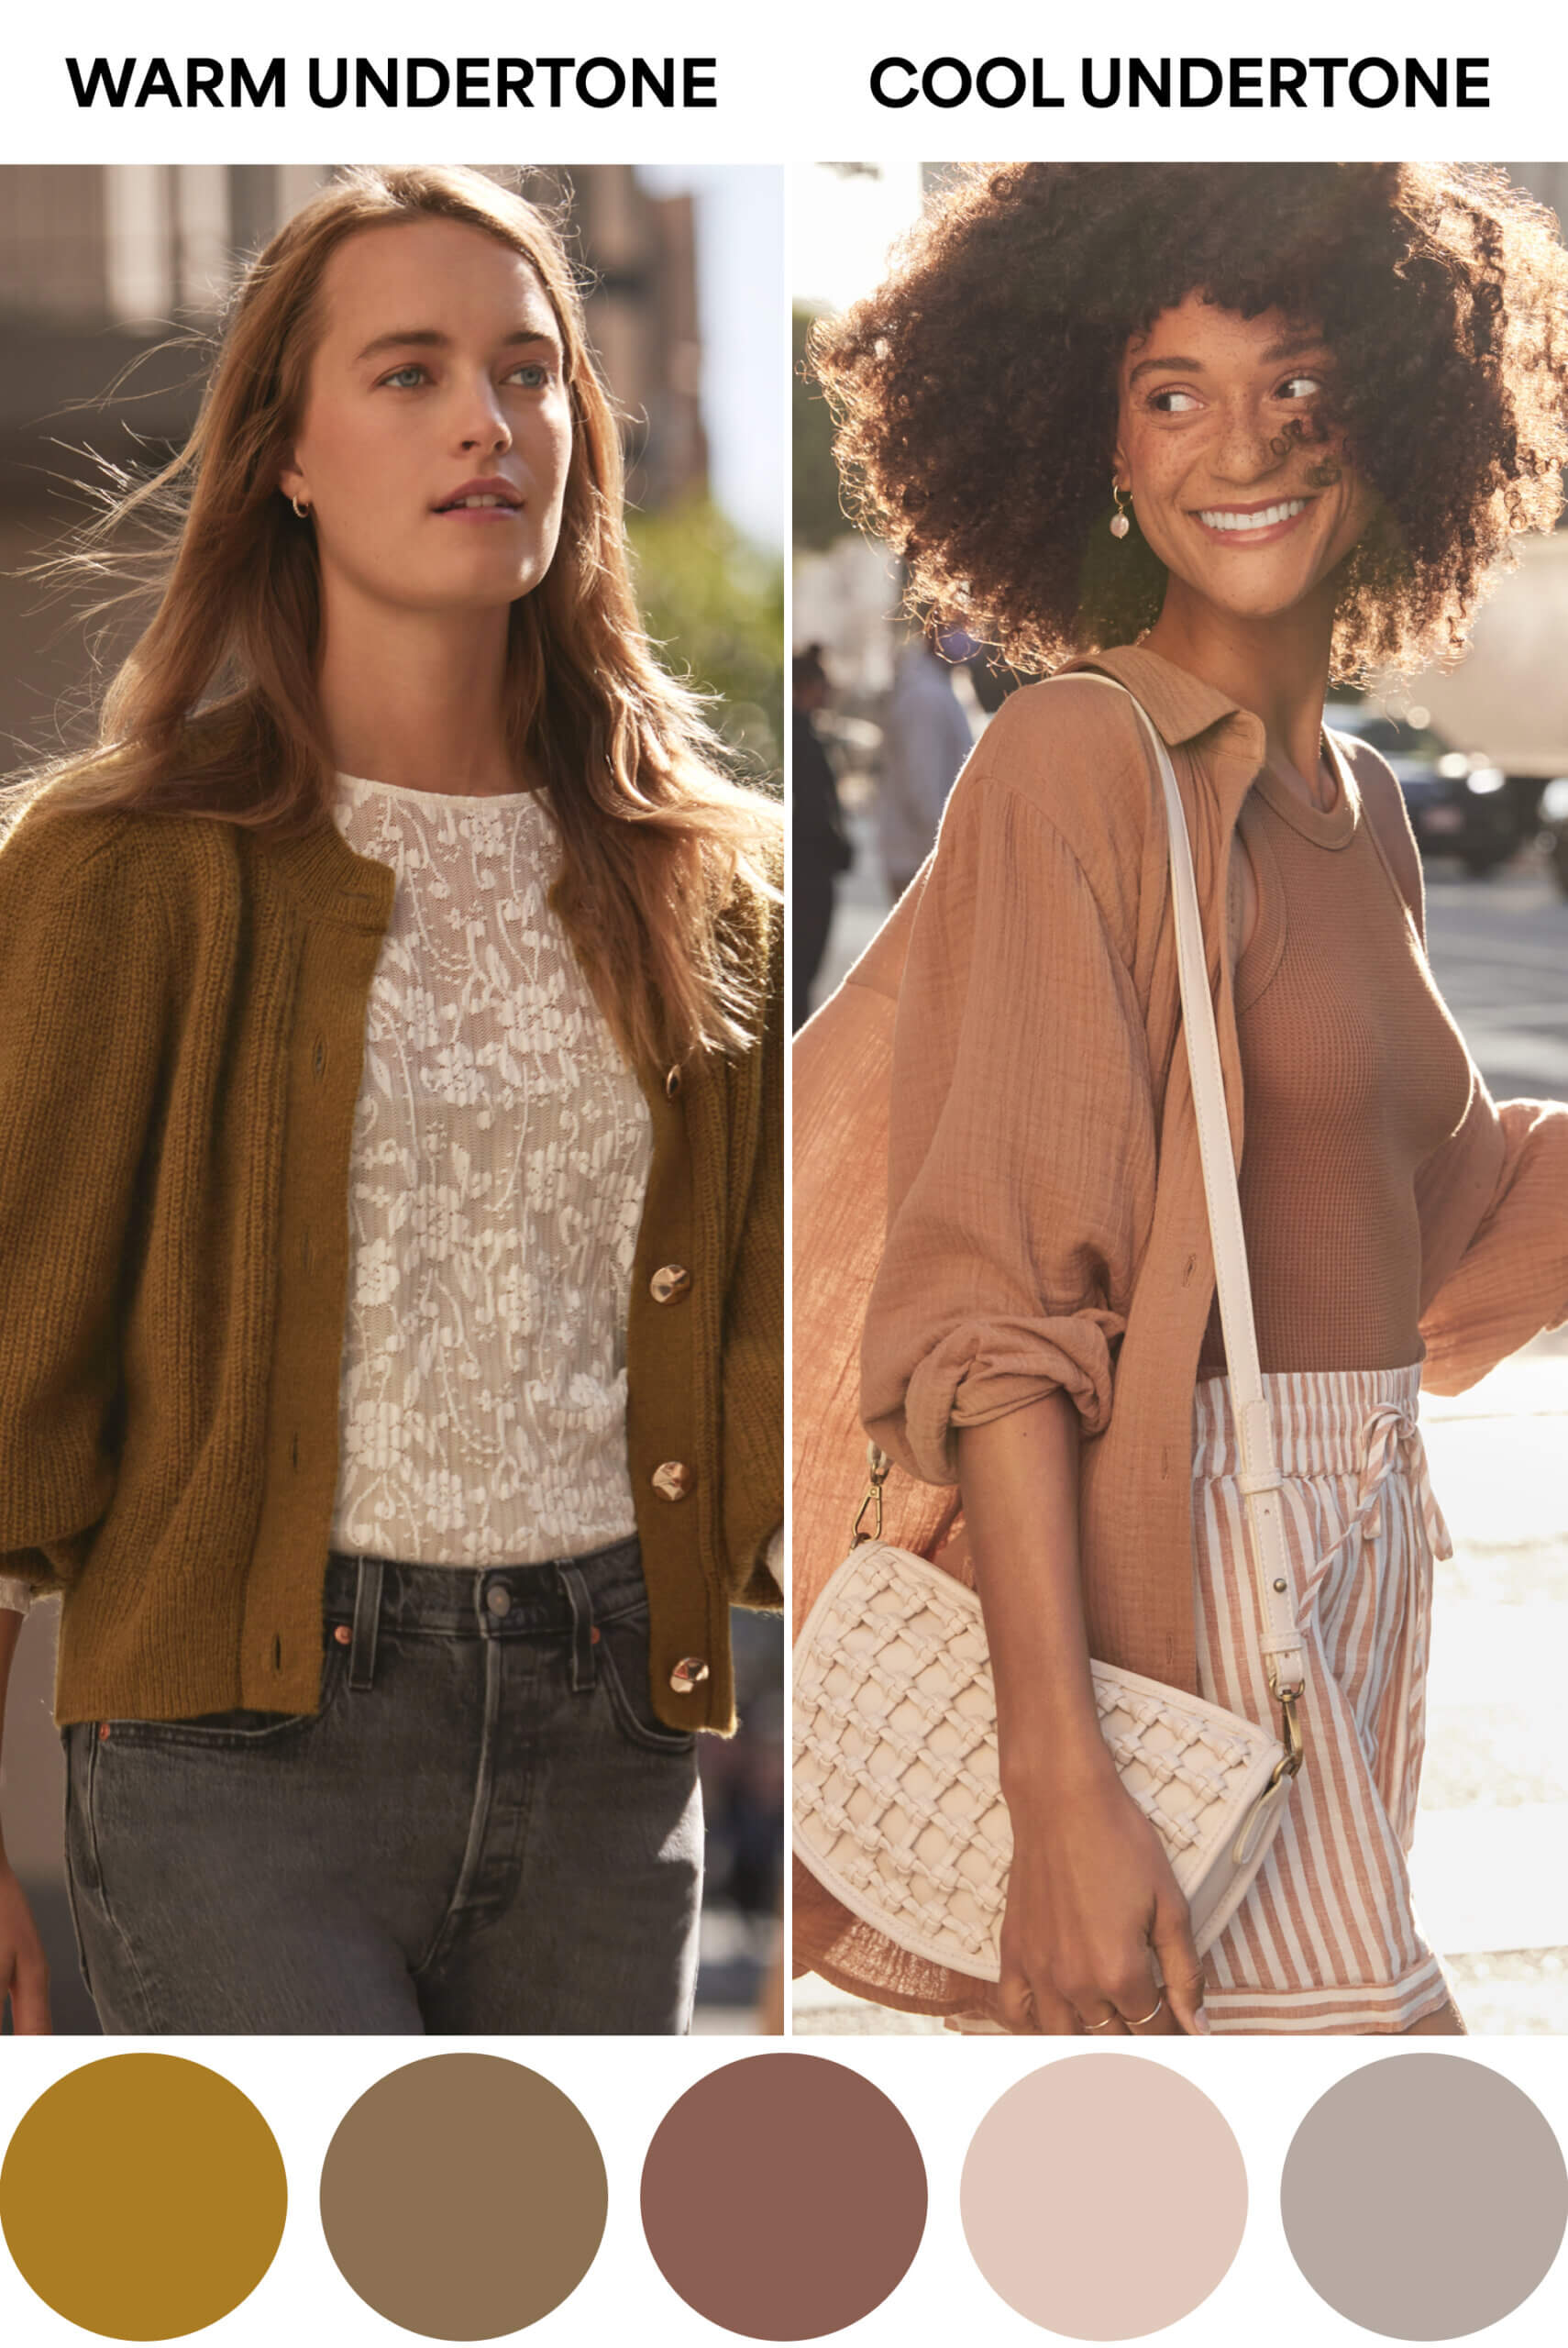 On the left, a medium-skinned woman with black hair wearing jeans and an off-white shirt and jacket. On the right, a light-skinned woman with red hair wearing olive pants, a brown and tan polka-dot shirt, and a tan sweater. Below them, five circles in neutral shades.